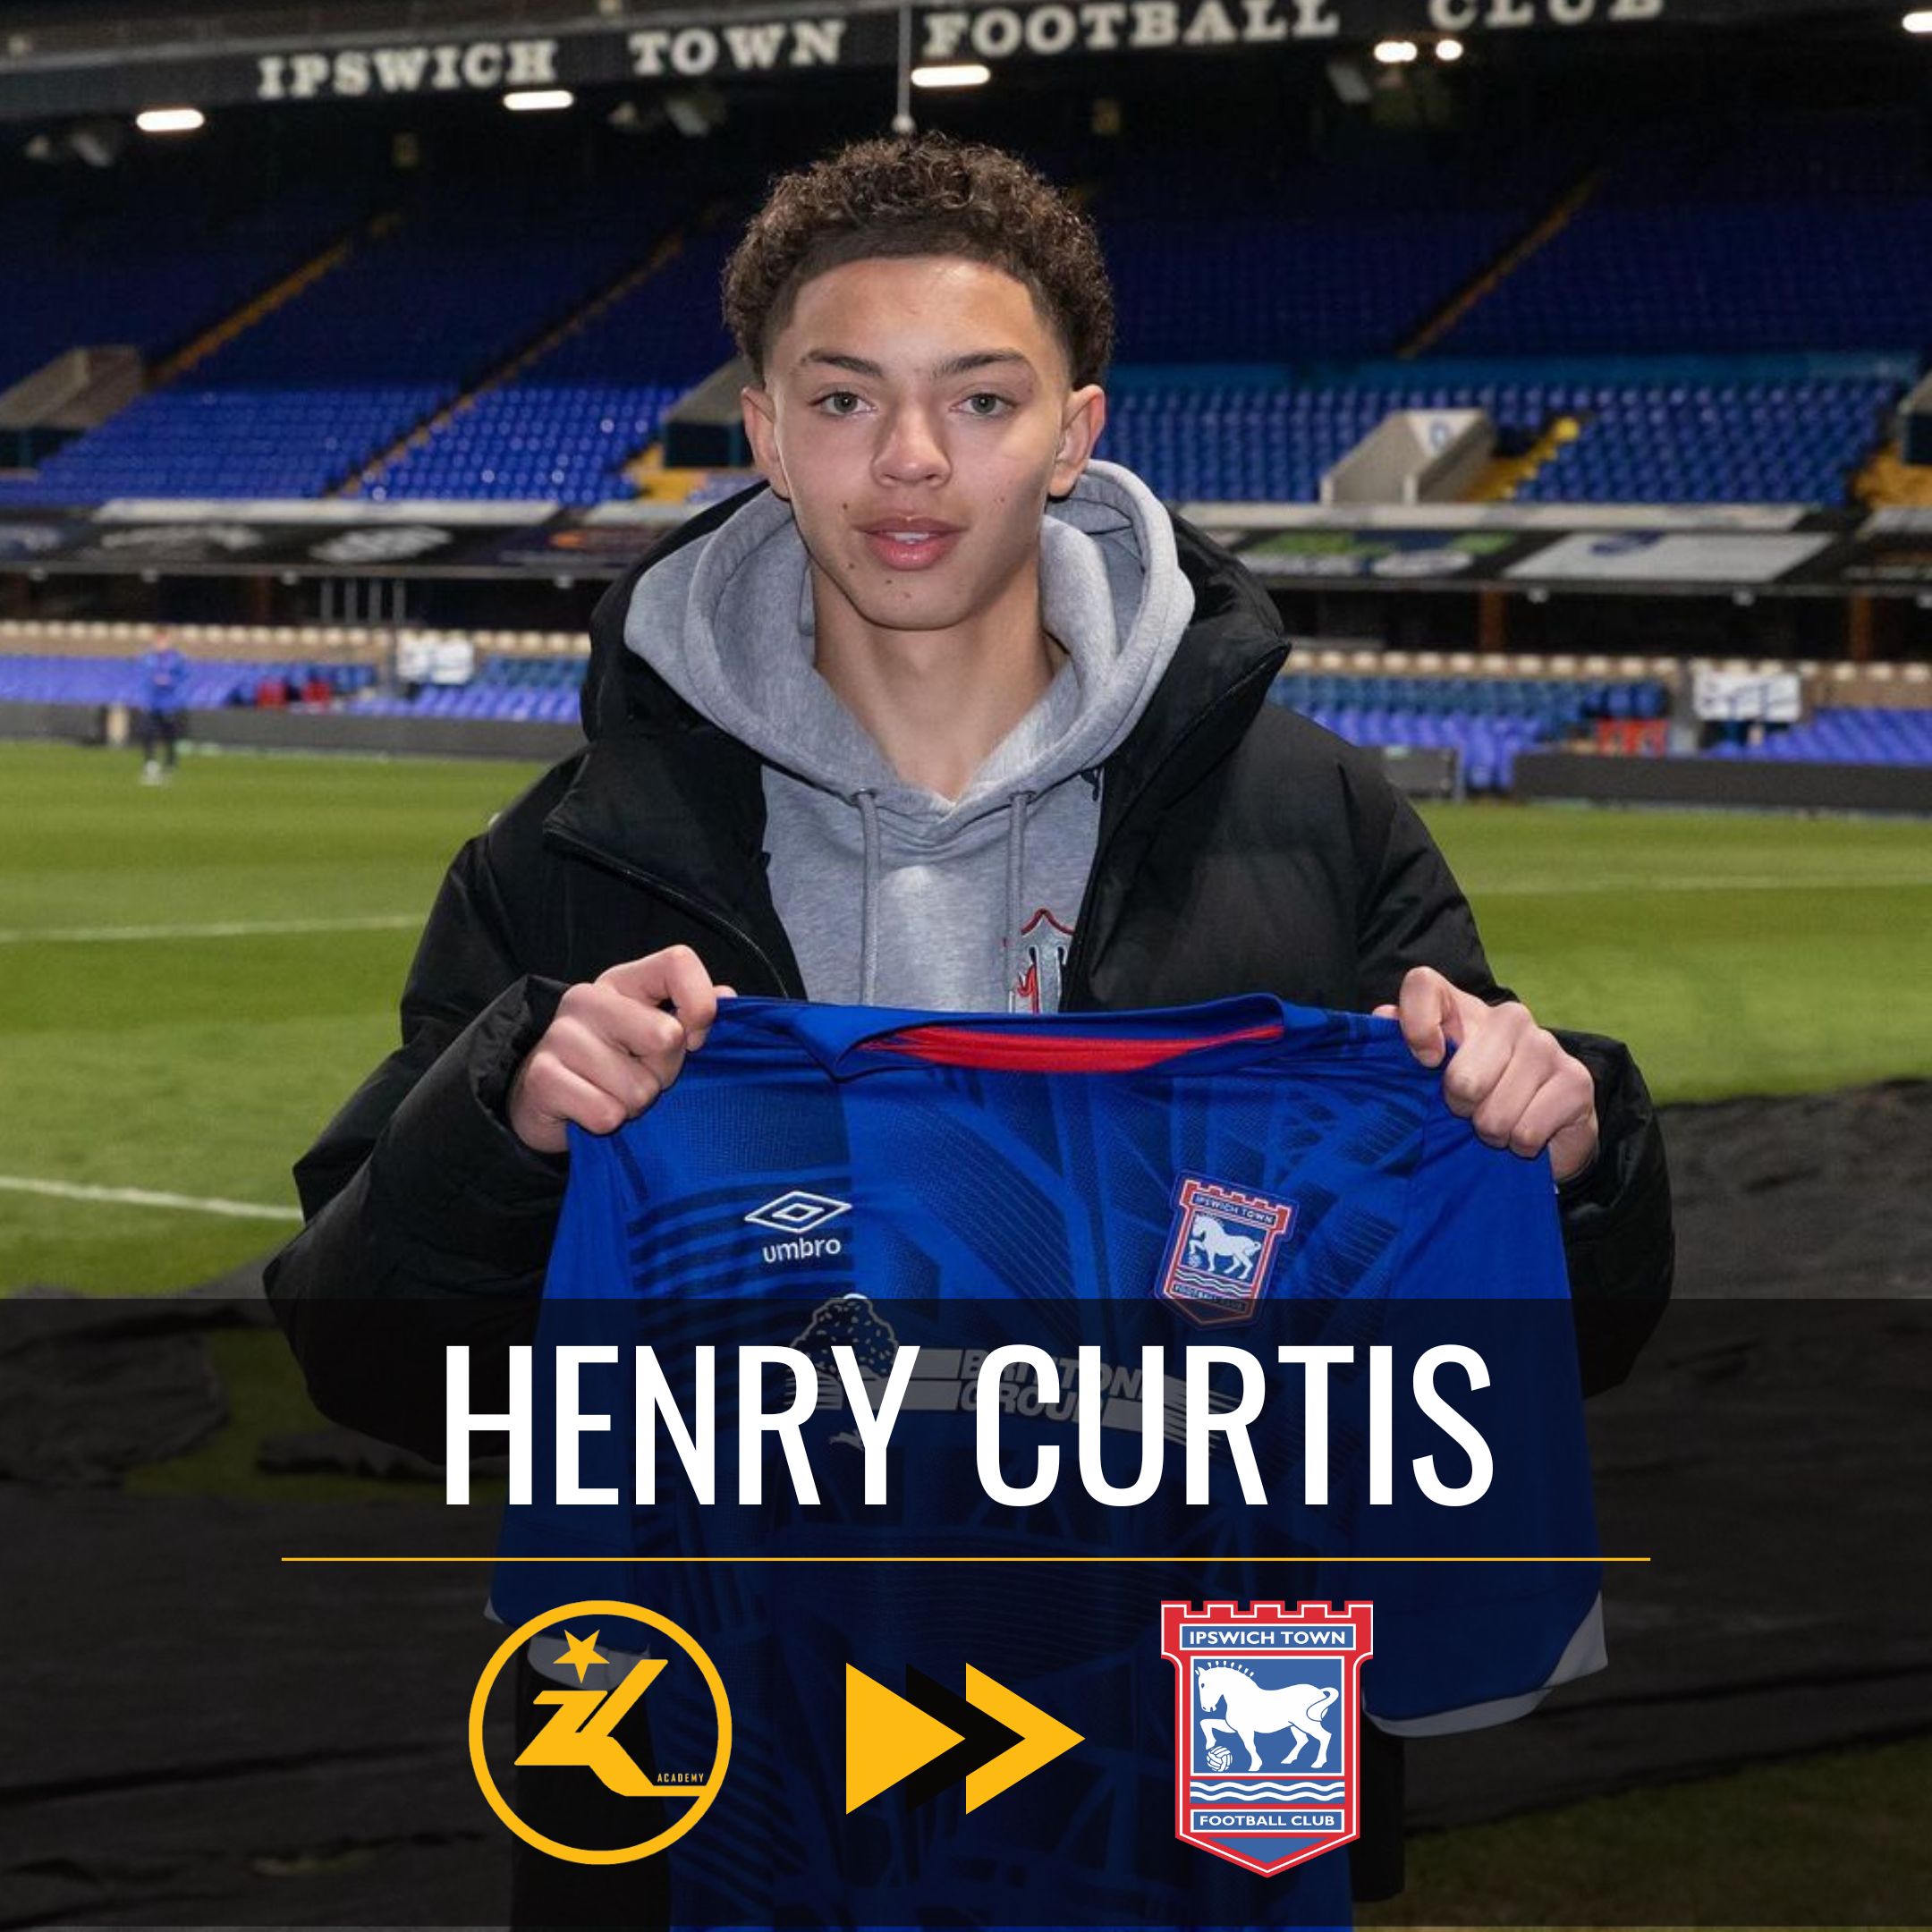 Henry Curtis signs for Ipswich Town FC